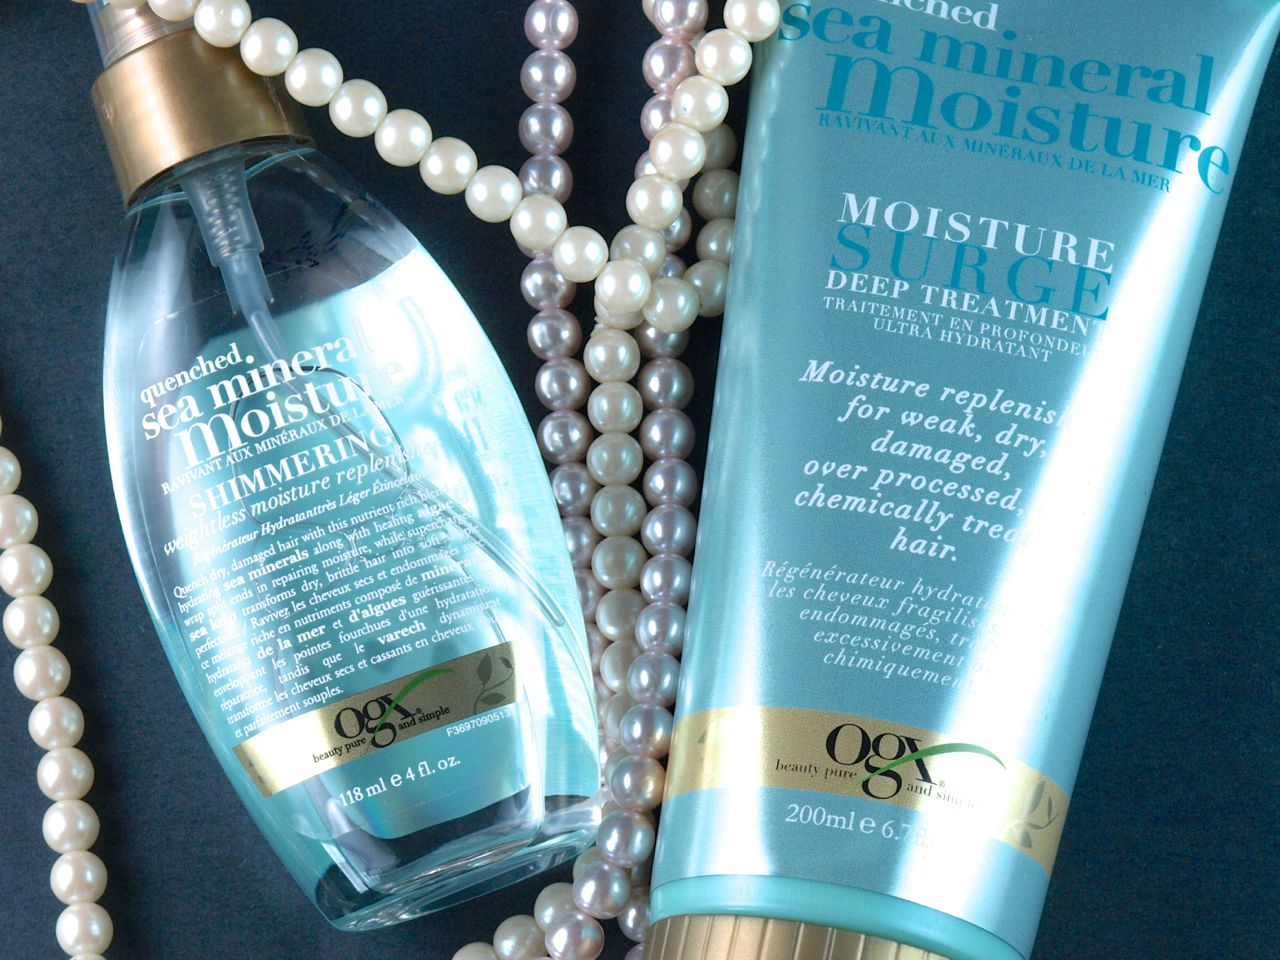 OGX Quenched Sea Mineral Moisture Collection: Review